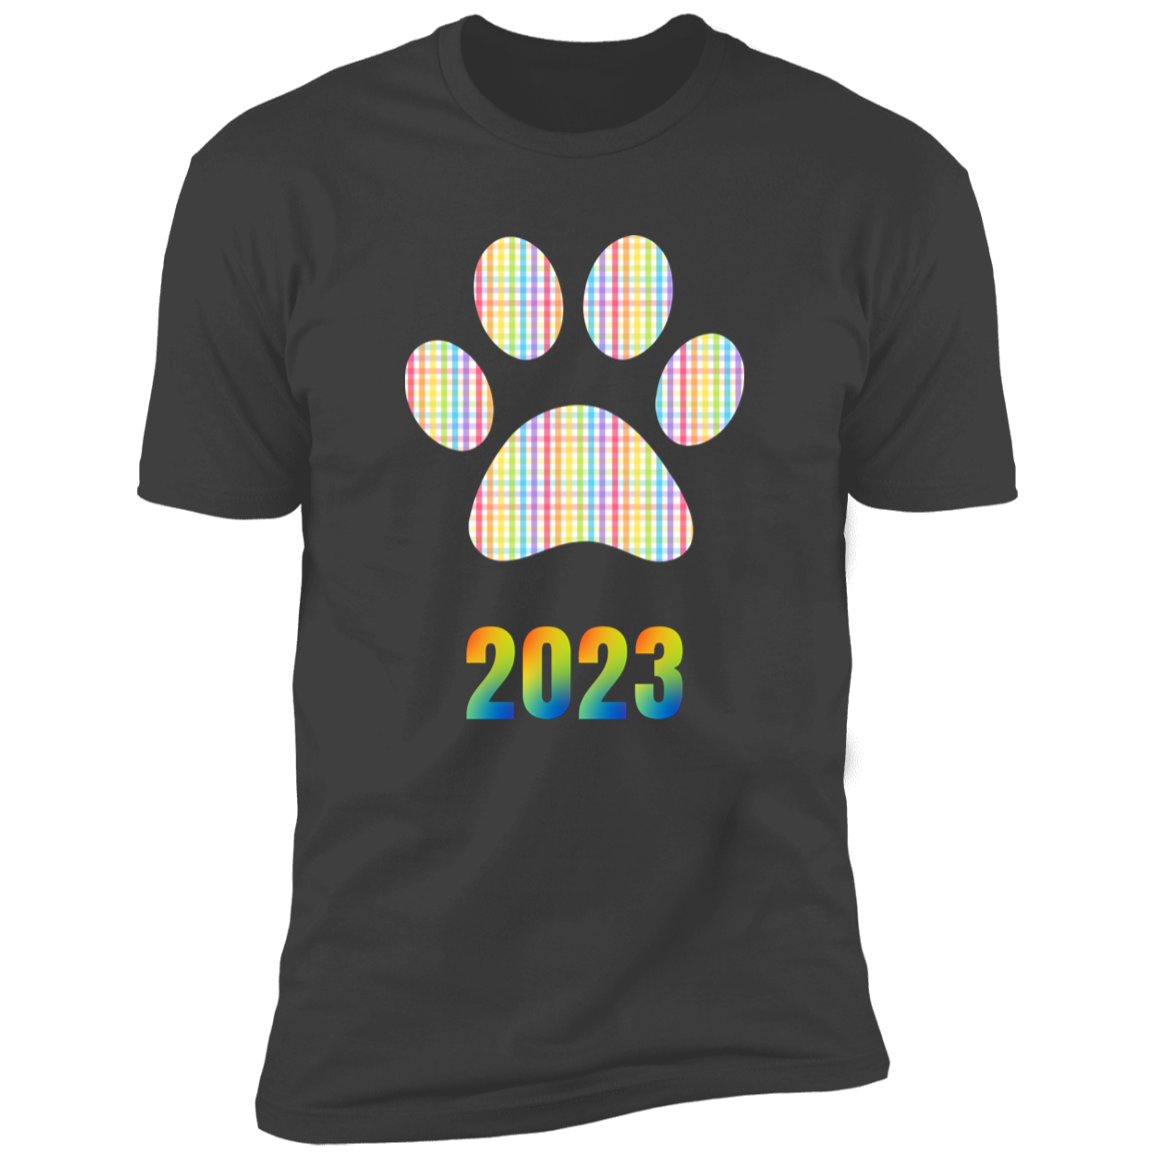 Pride Paw 2023 (Gingham) Pride T-shirt, Paw Pride Dog Shirt for humans, in heavy metal gray